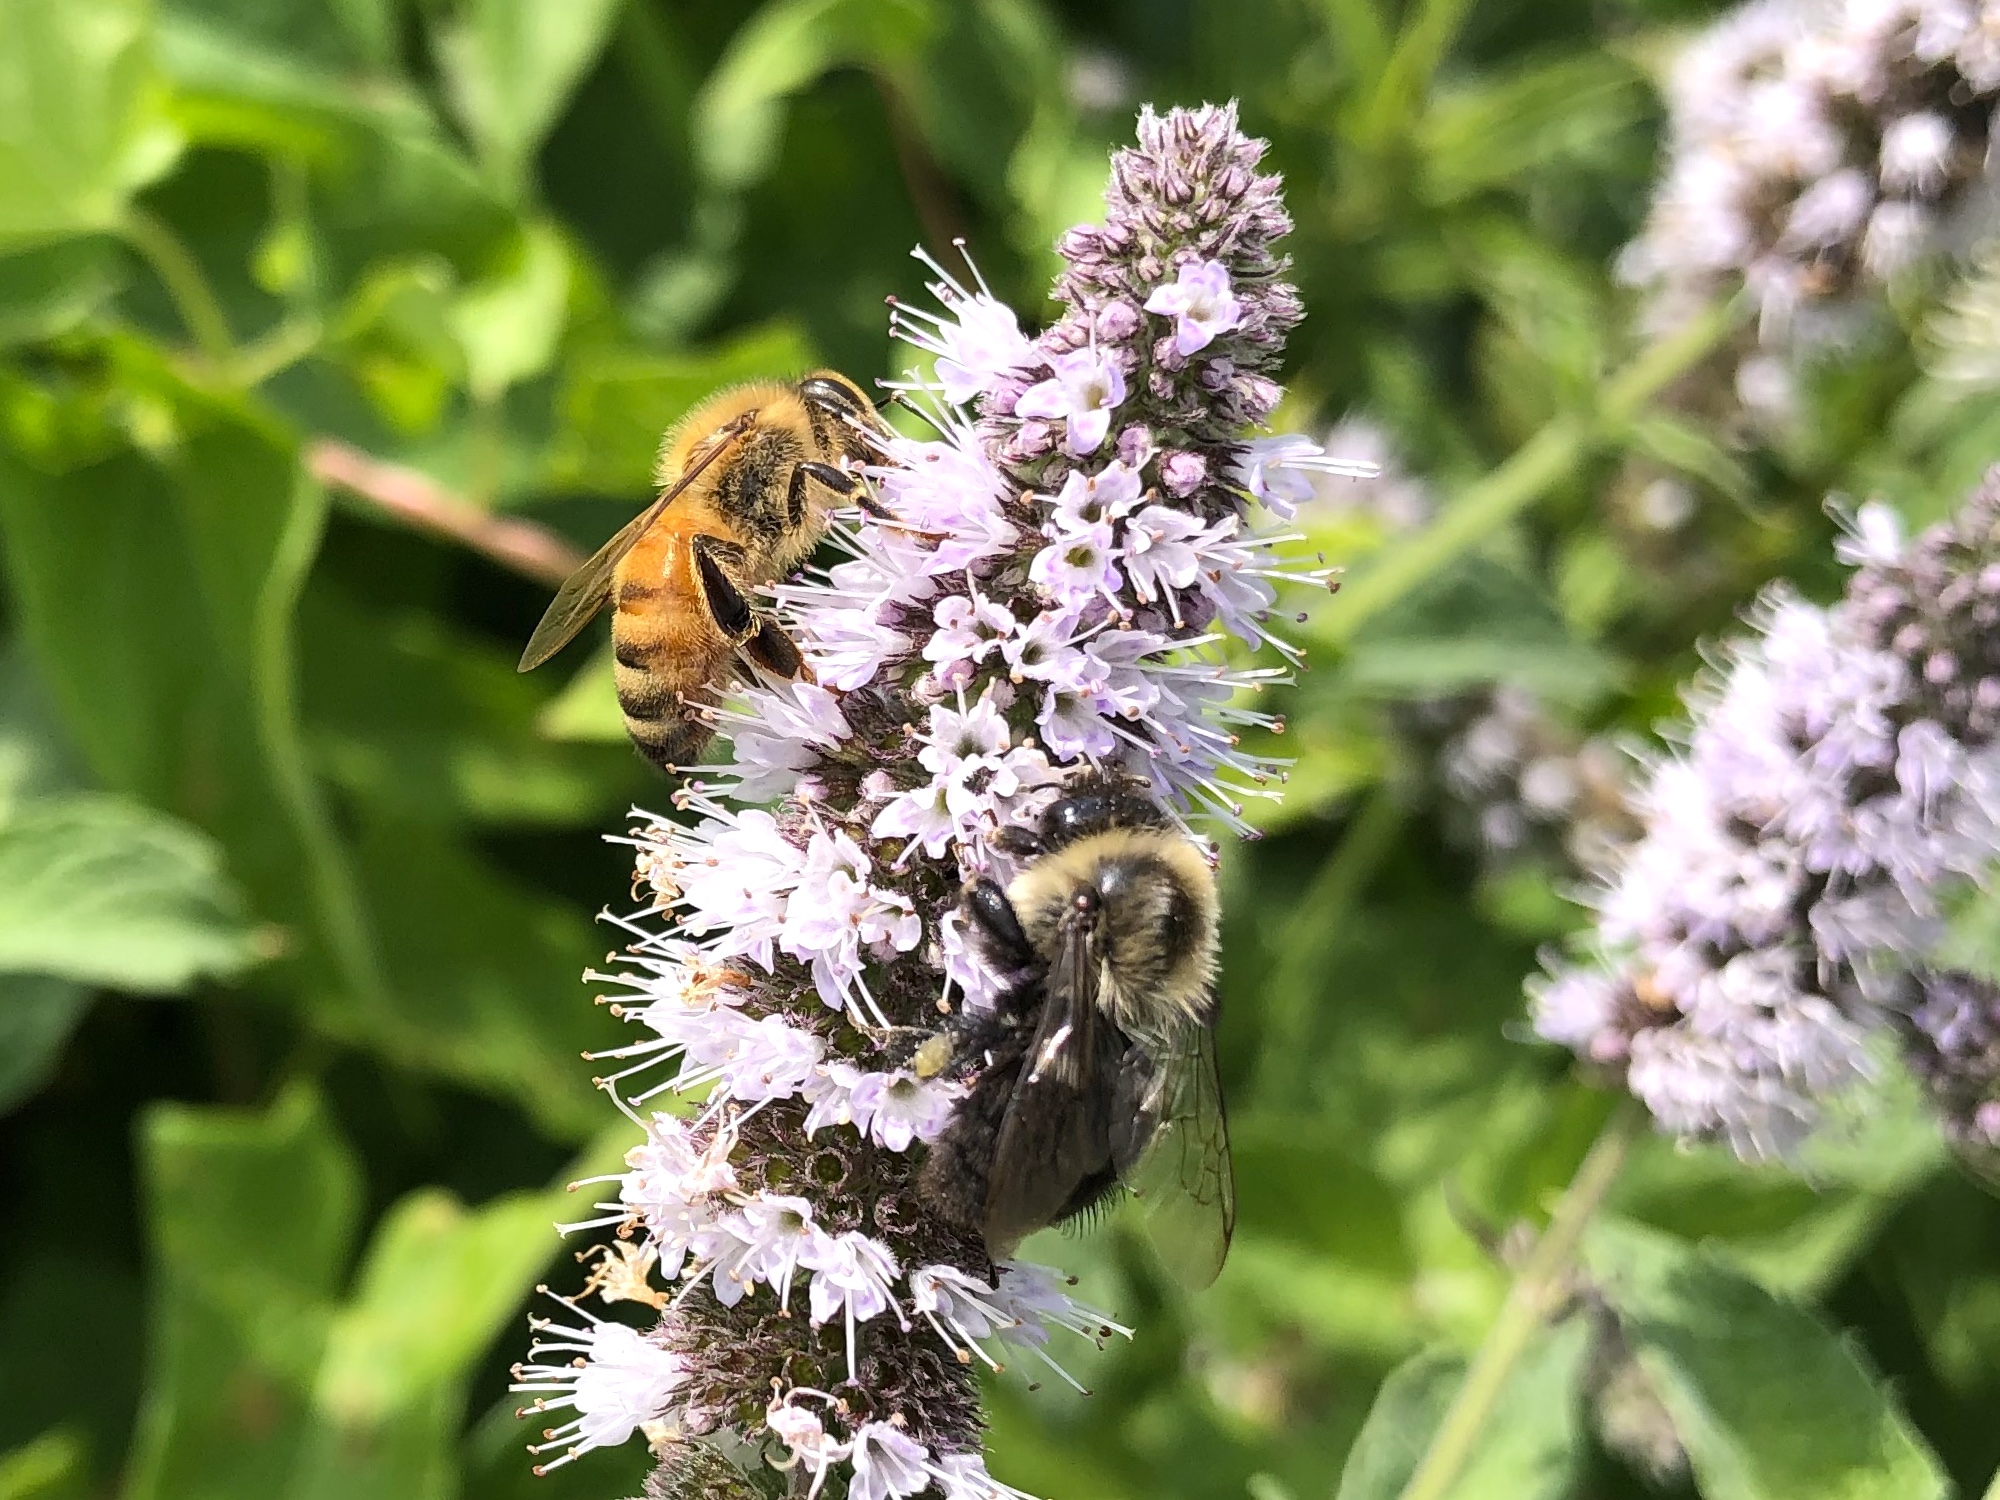 Bee on Spearmint on shore of Lake Wingra on August 22, 2020.